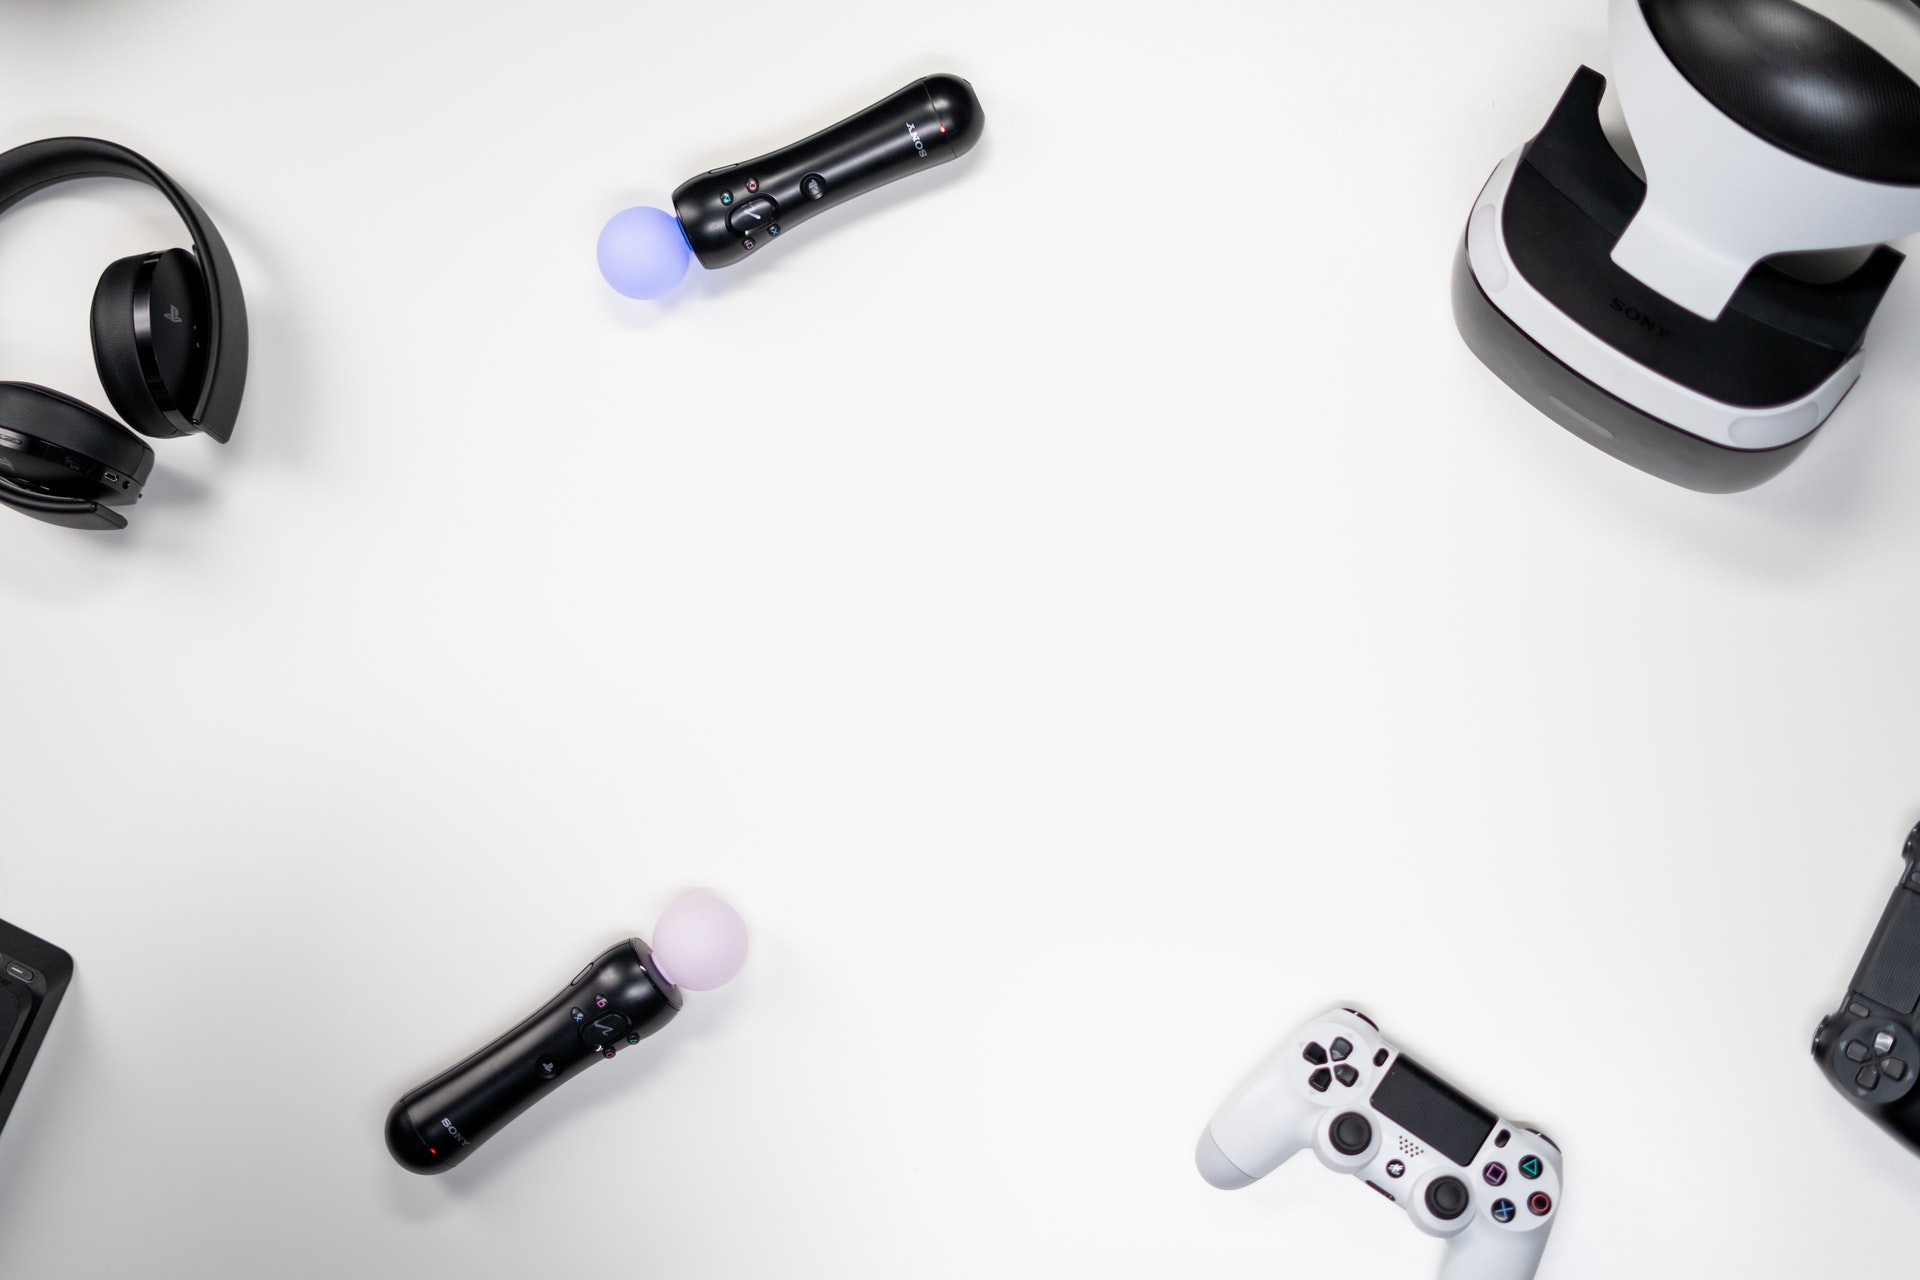 Headphones, Sony Move Controller, and VR headset on a white background